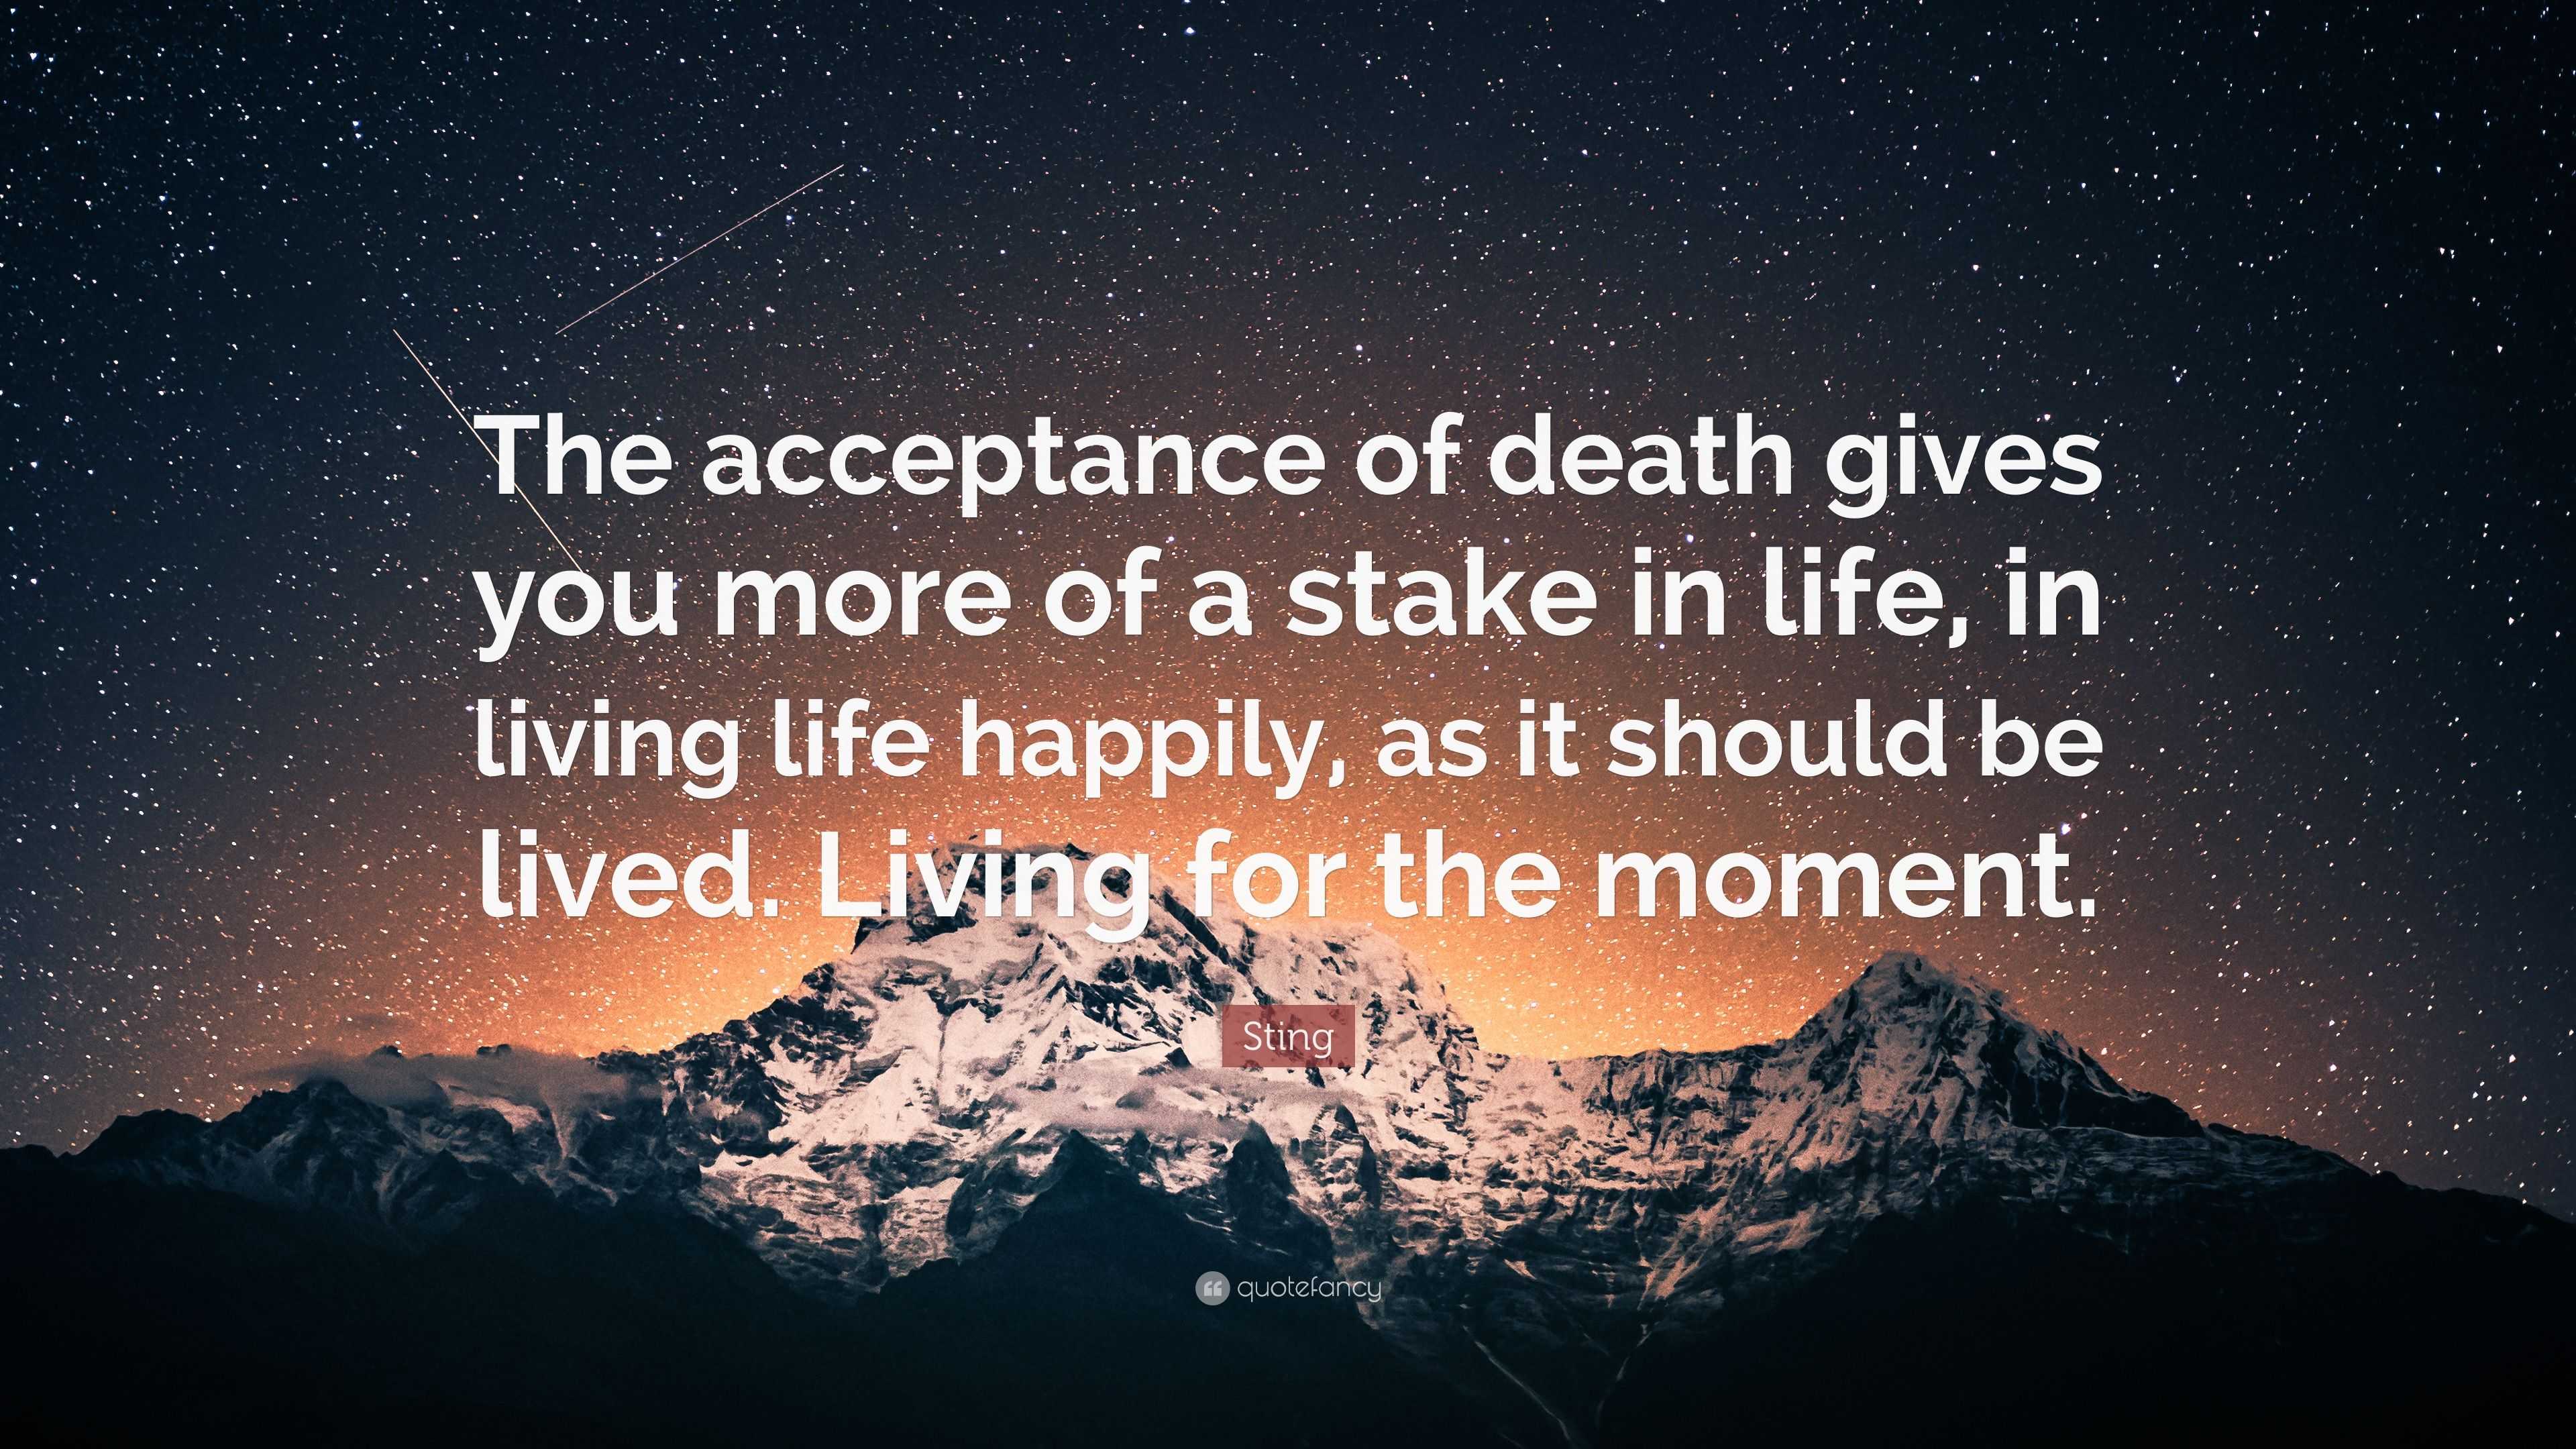 Sting Quote: “The acceptance of death gives you more of a stake in life ...